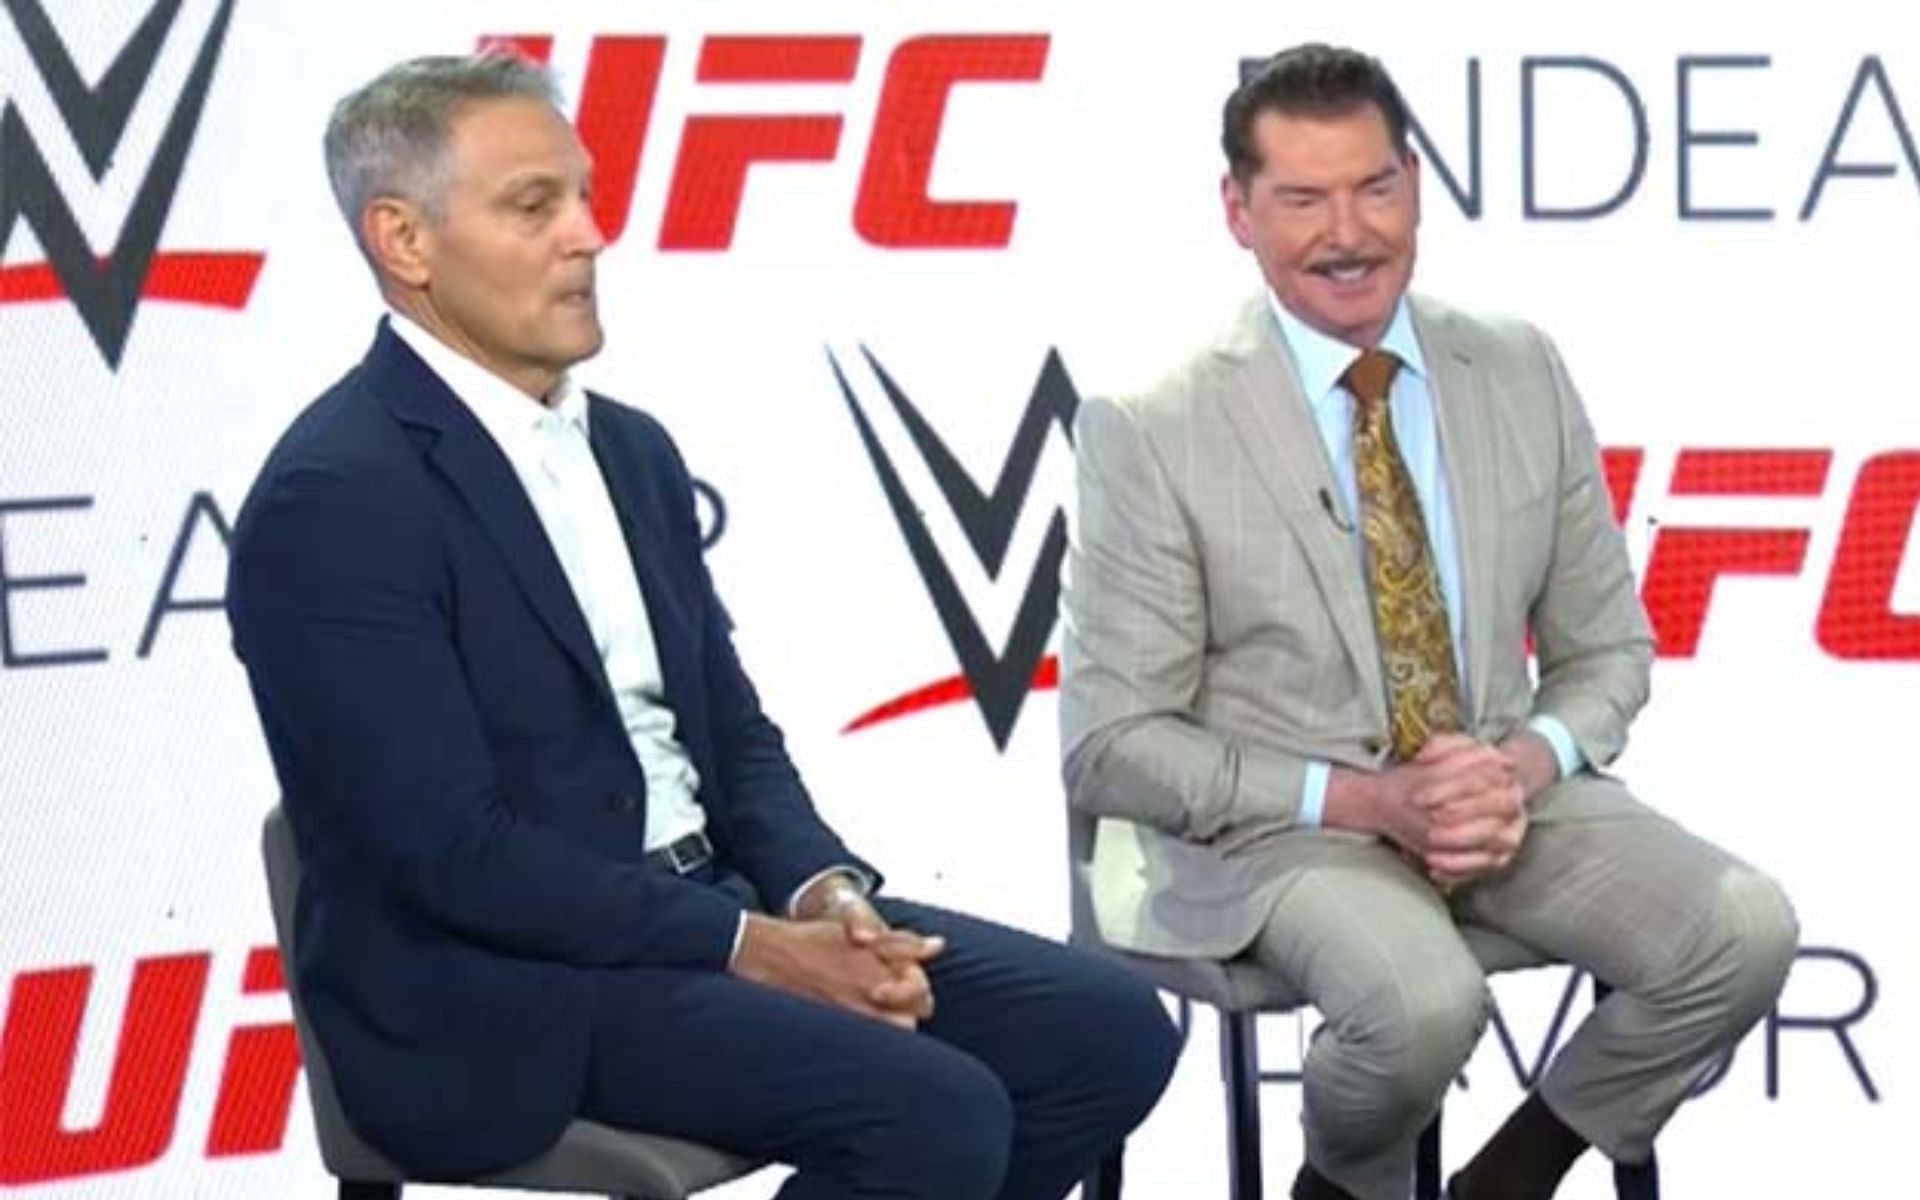 Ari Emanuel is the CEO of the new WWE-UFC merger company